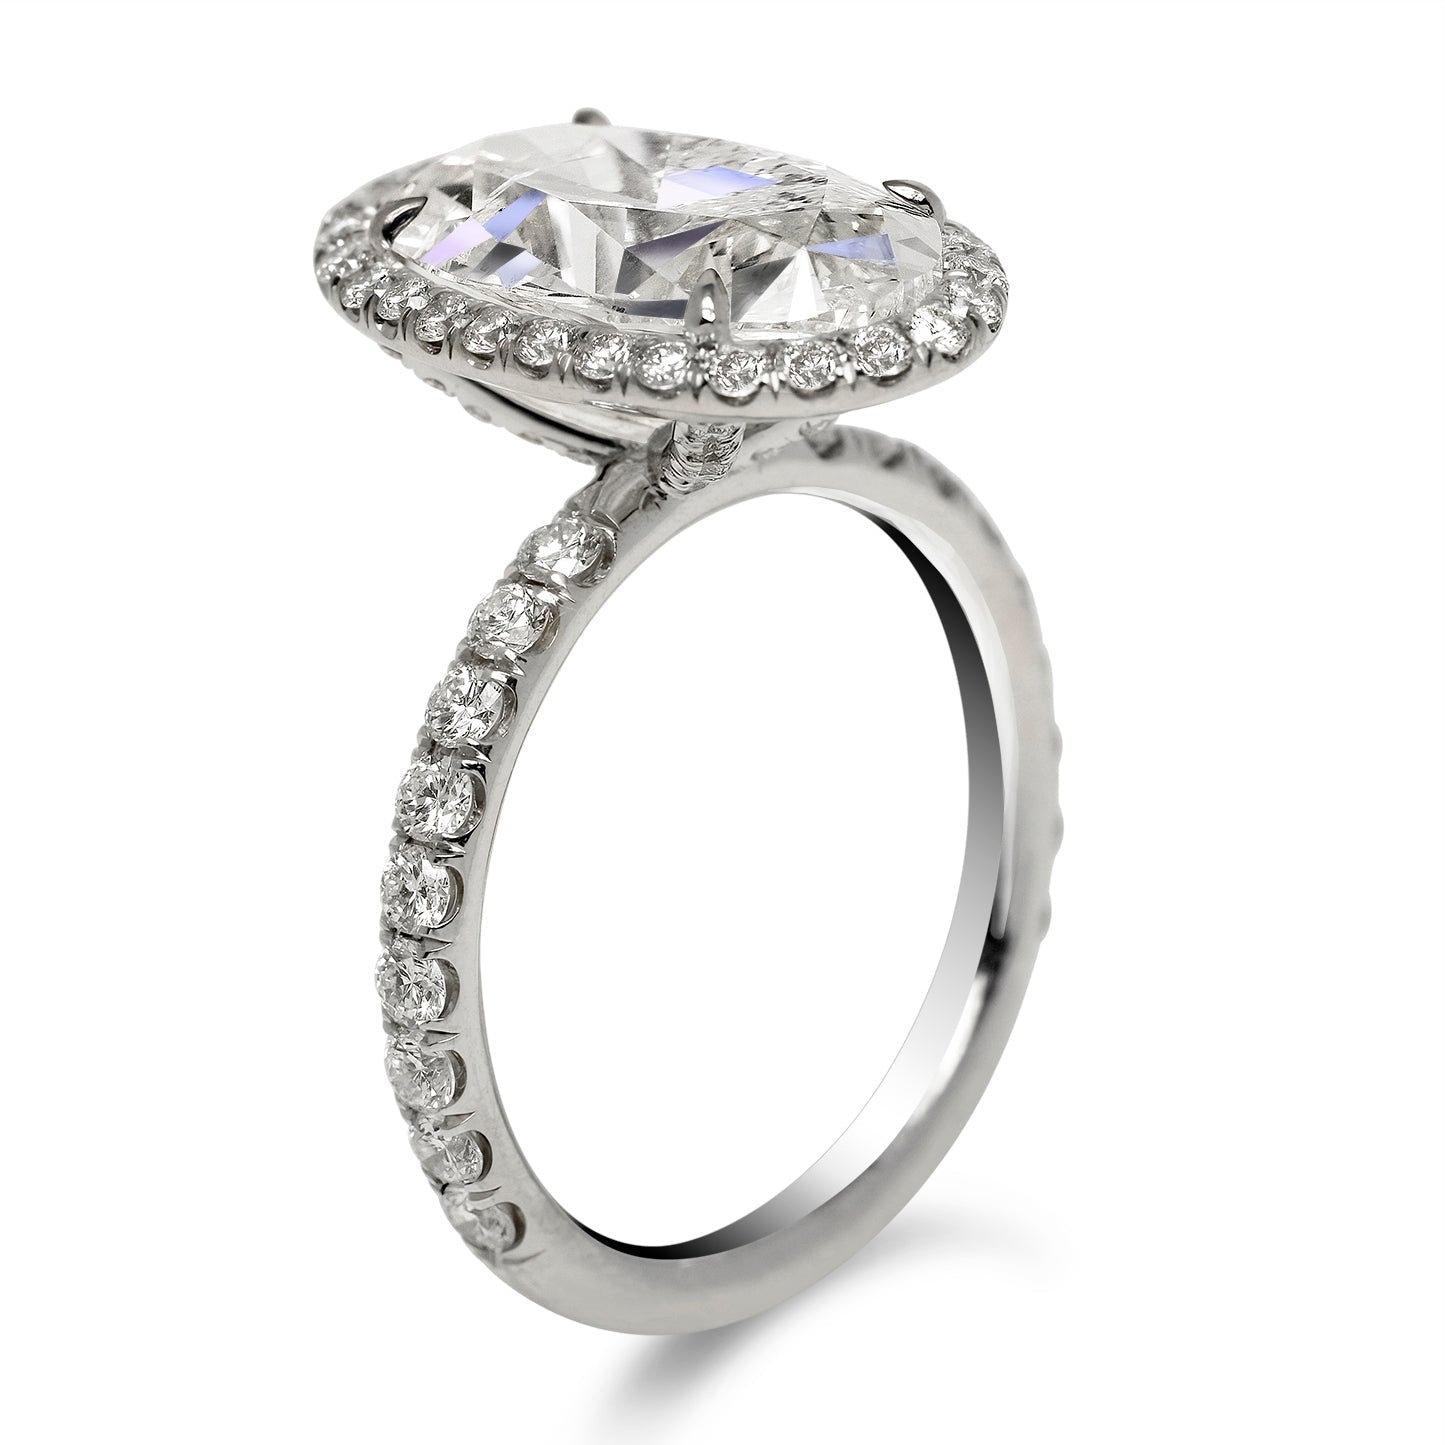 Diamond Ring Oval Cut 4 Carat Halo Ring in Platinum Front View